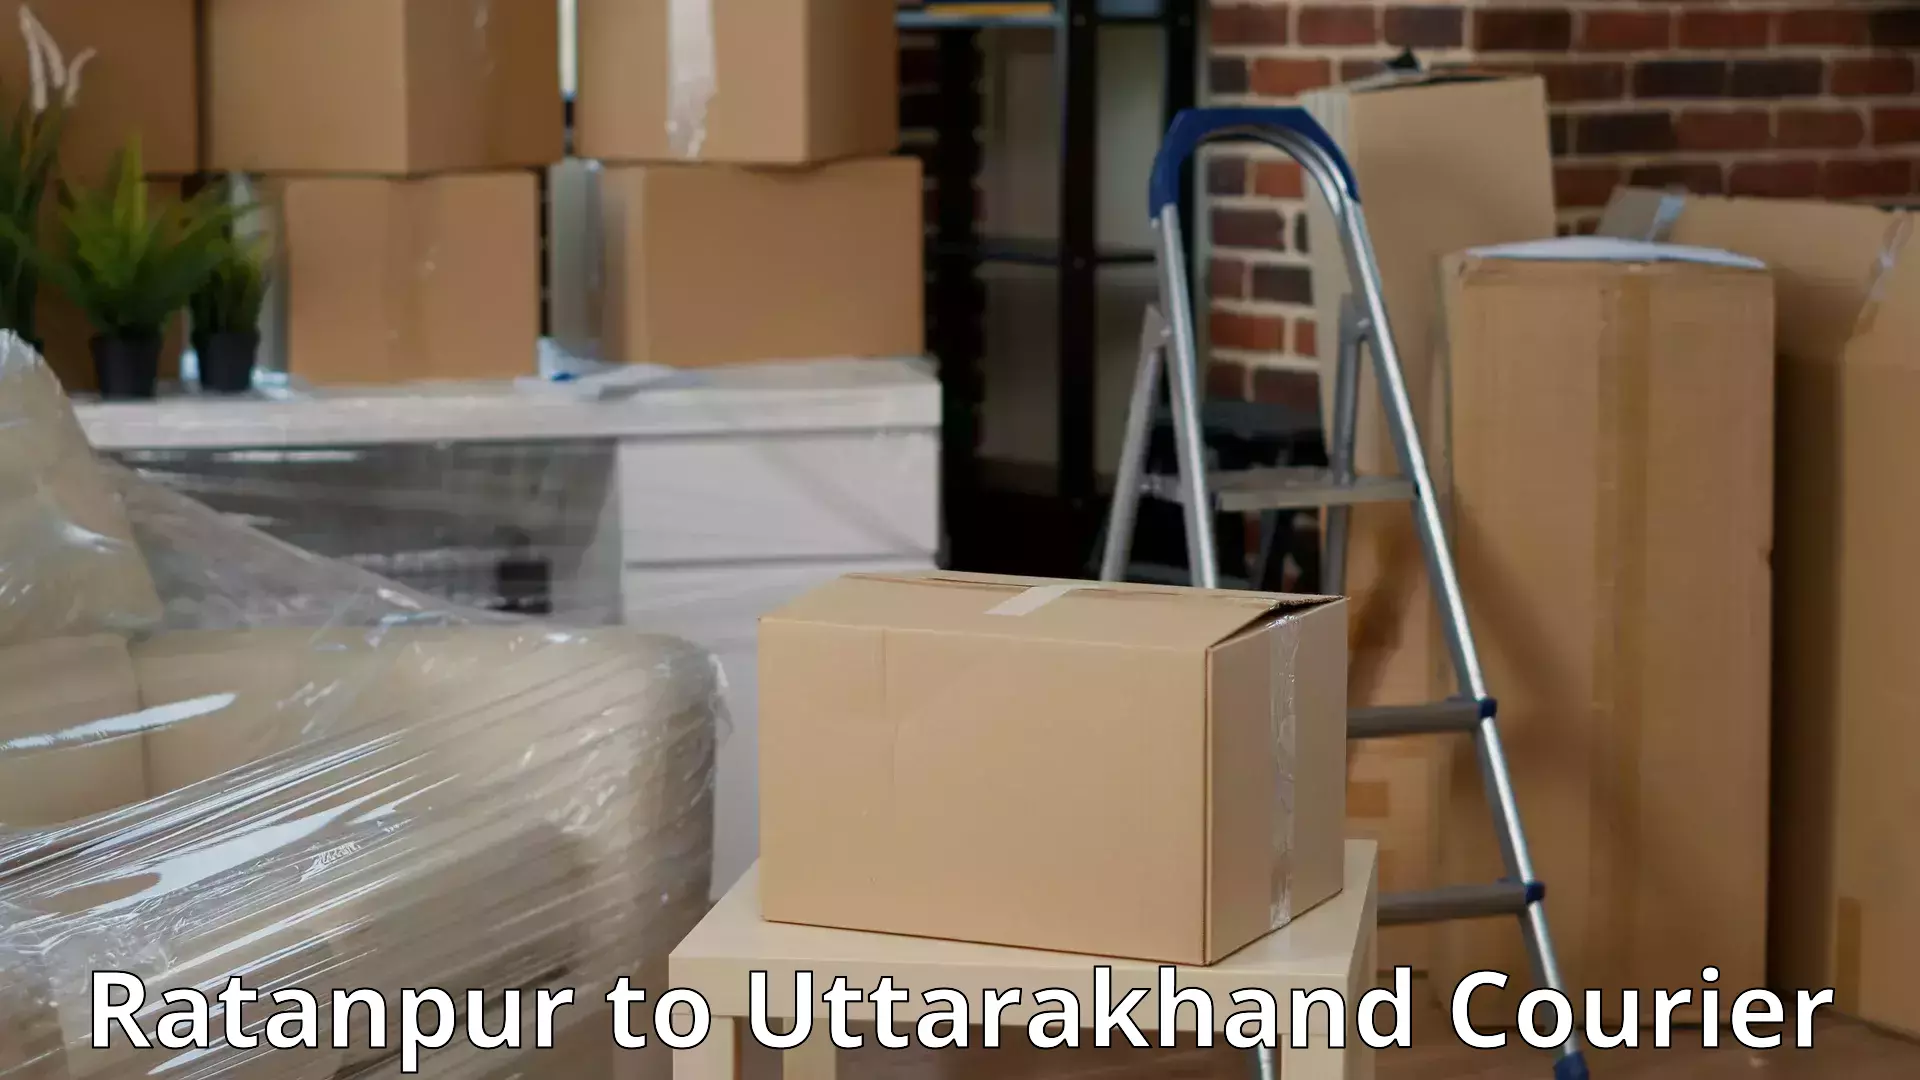 Budget-friendly movers Ratanpur to Rudrapur